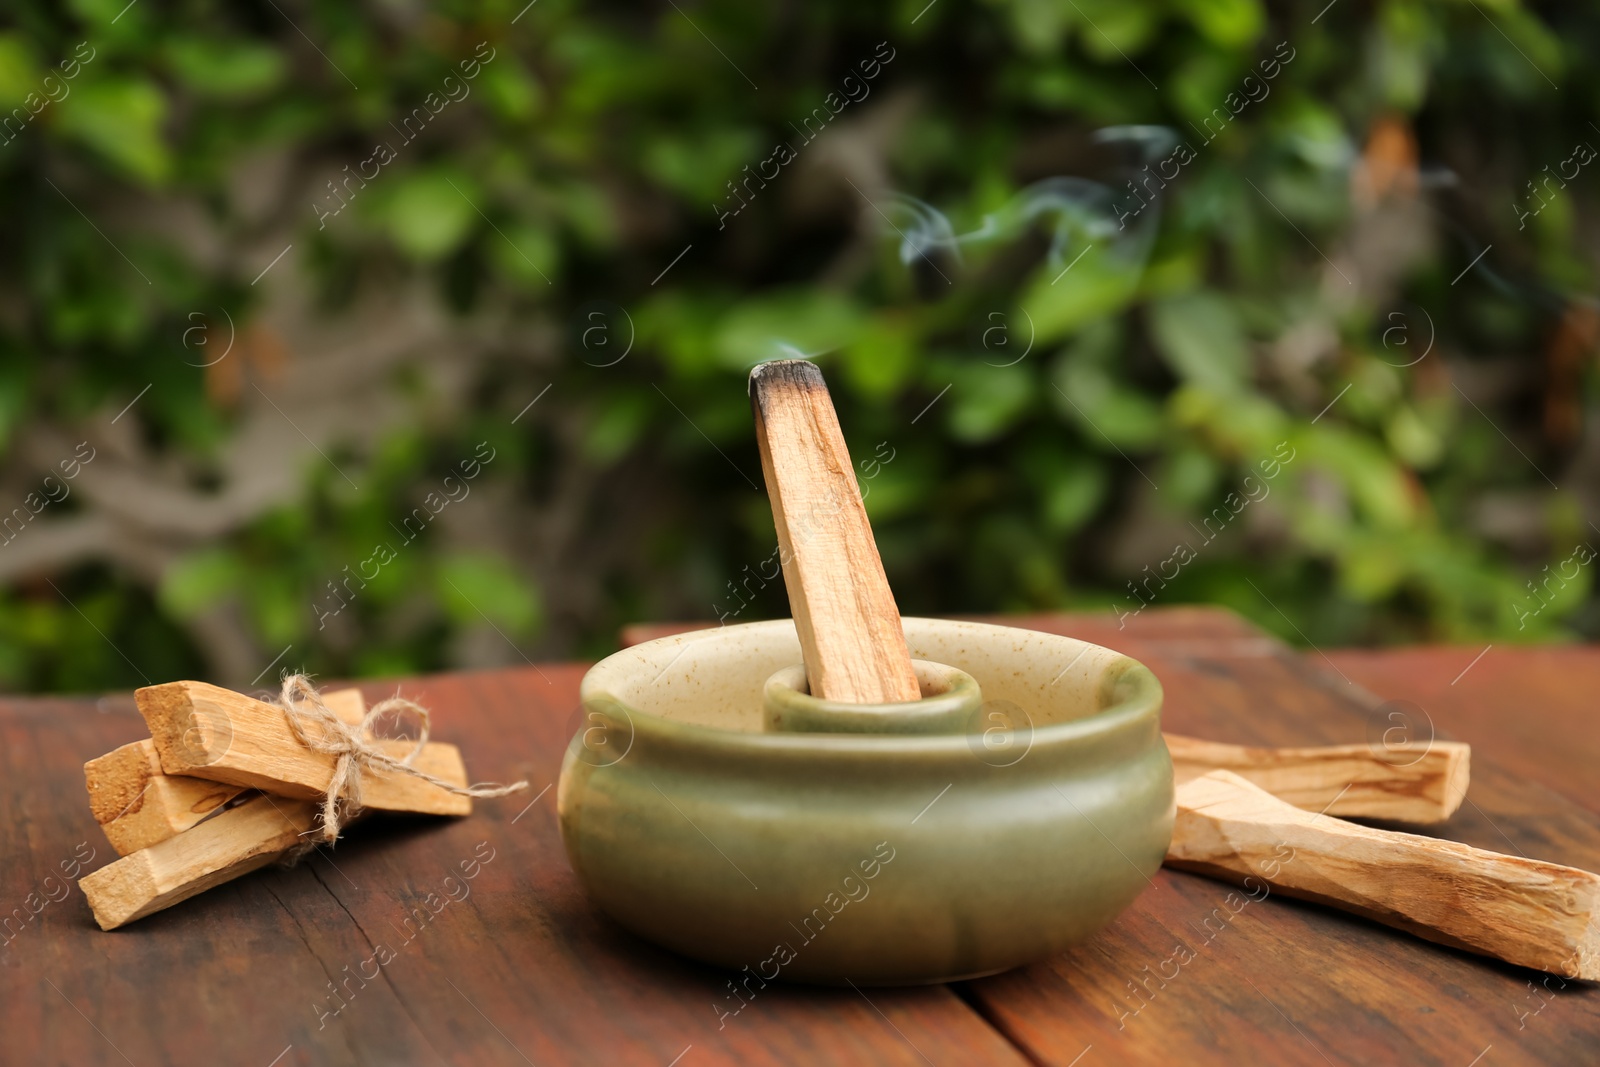 Photo of Palo Santo stick smoldering in holder on wooden table outdoors